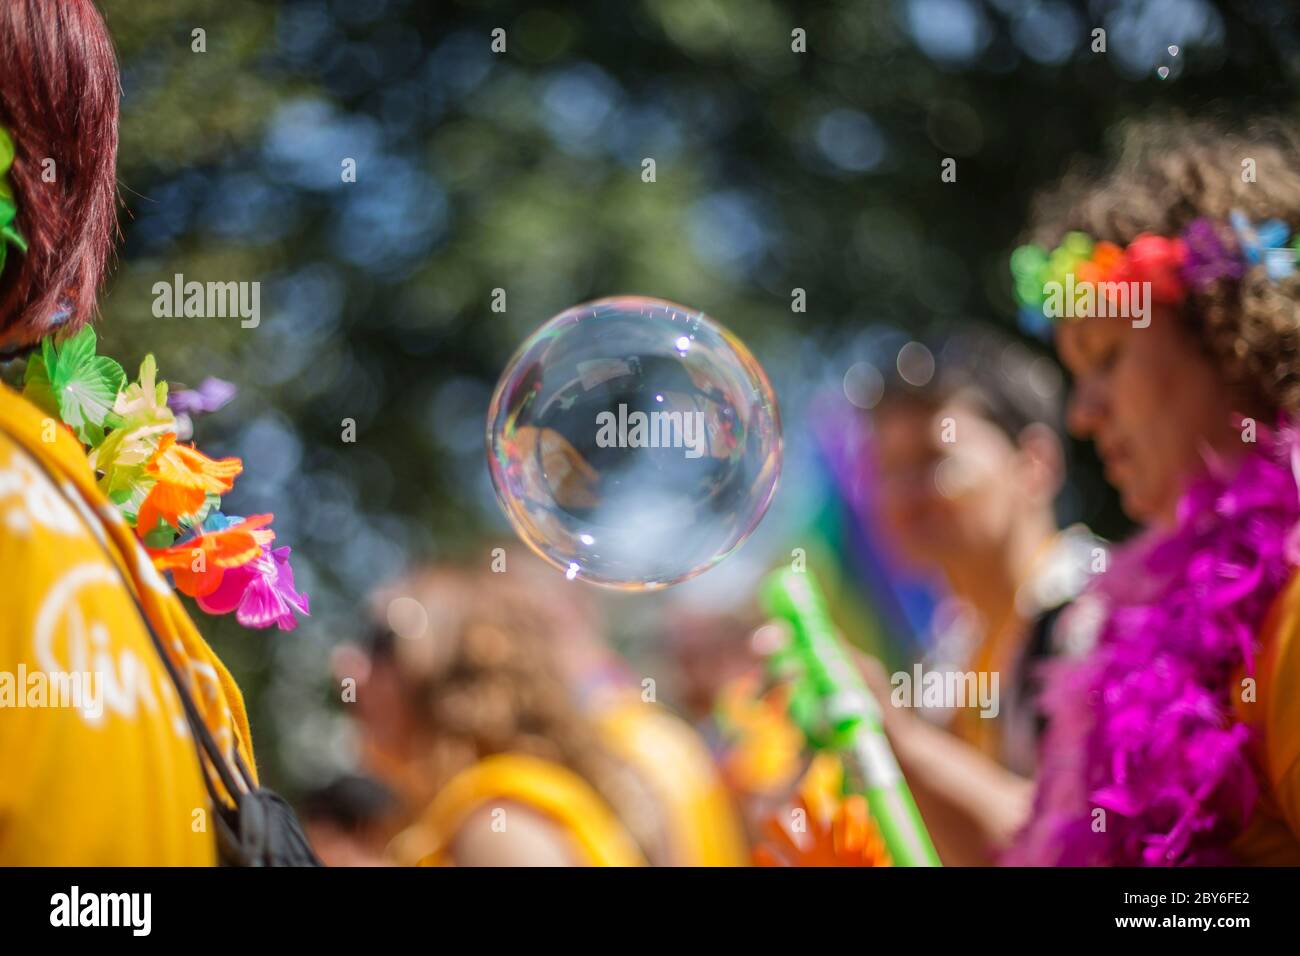 UK Pride Celebrations and March Stock Photo